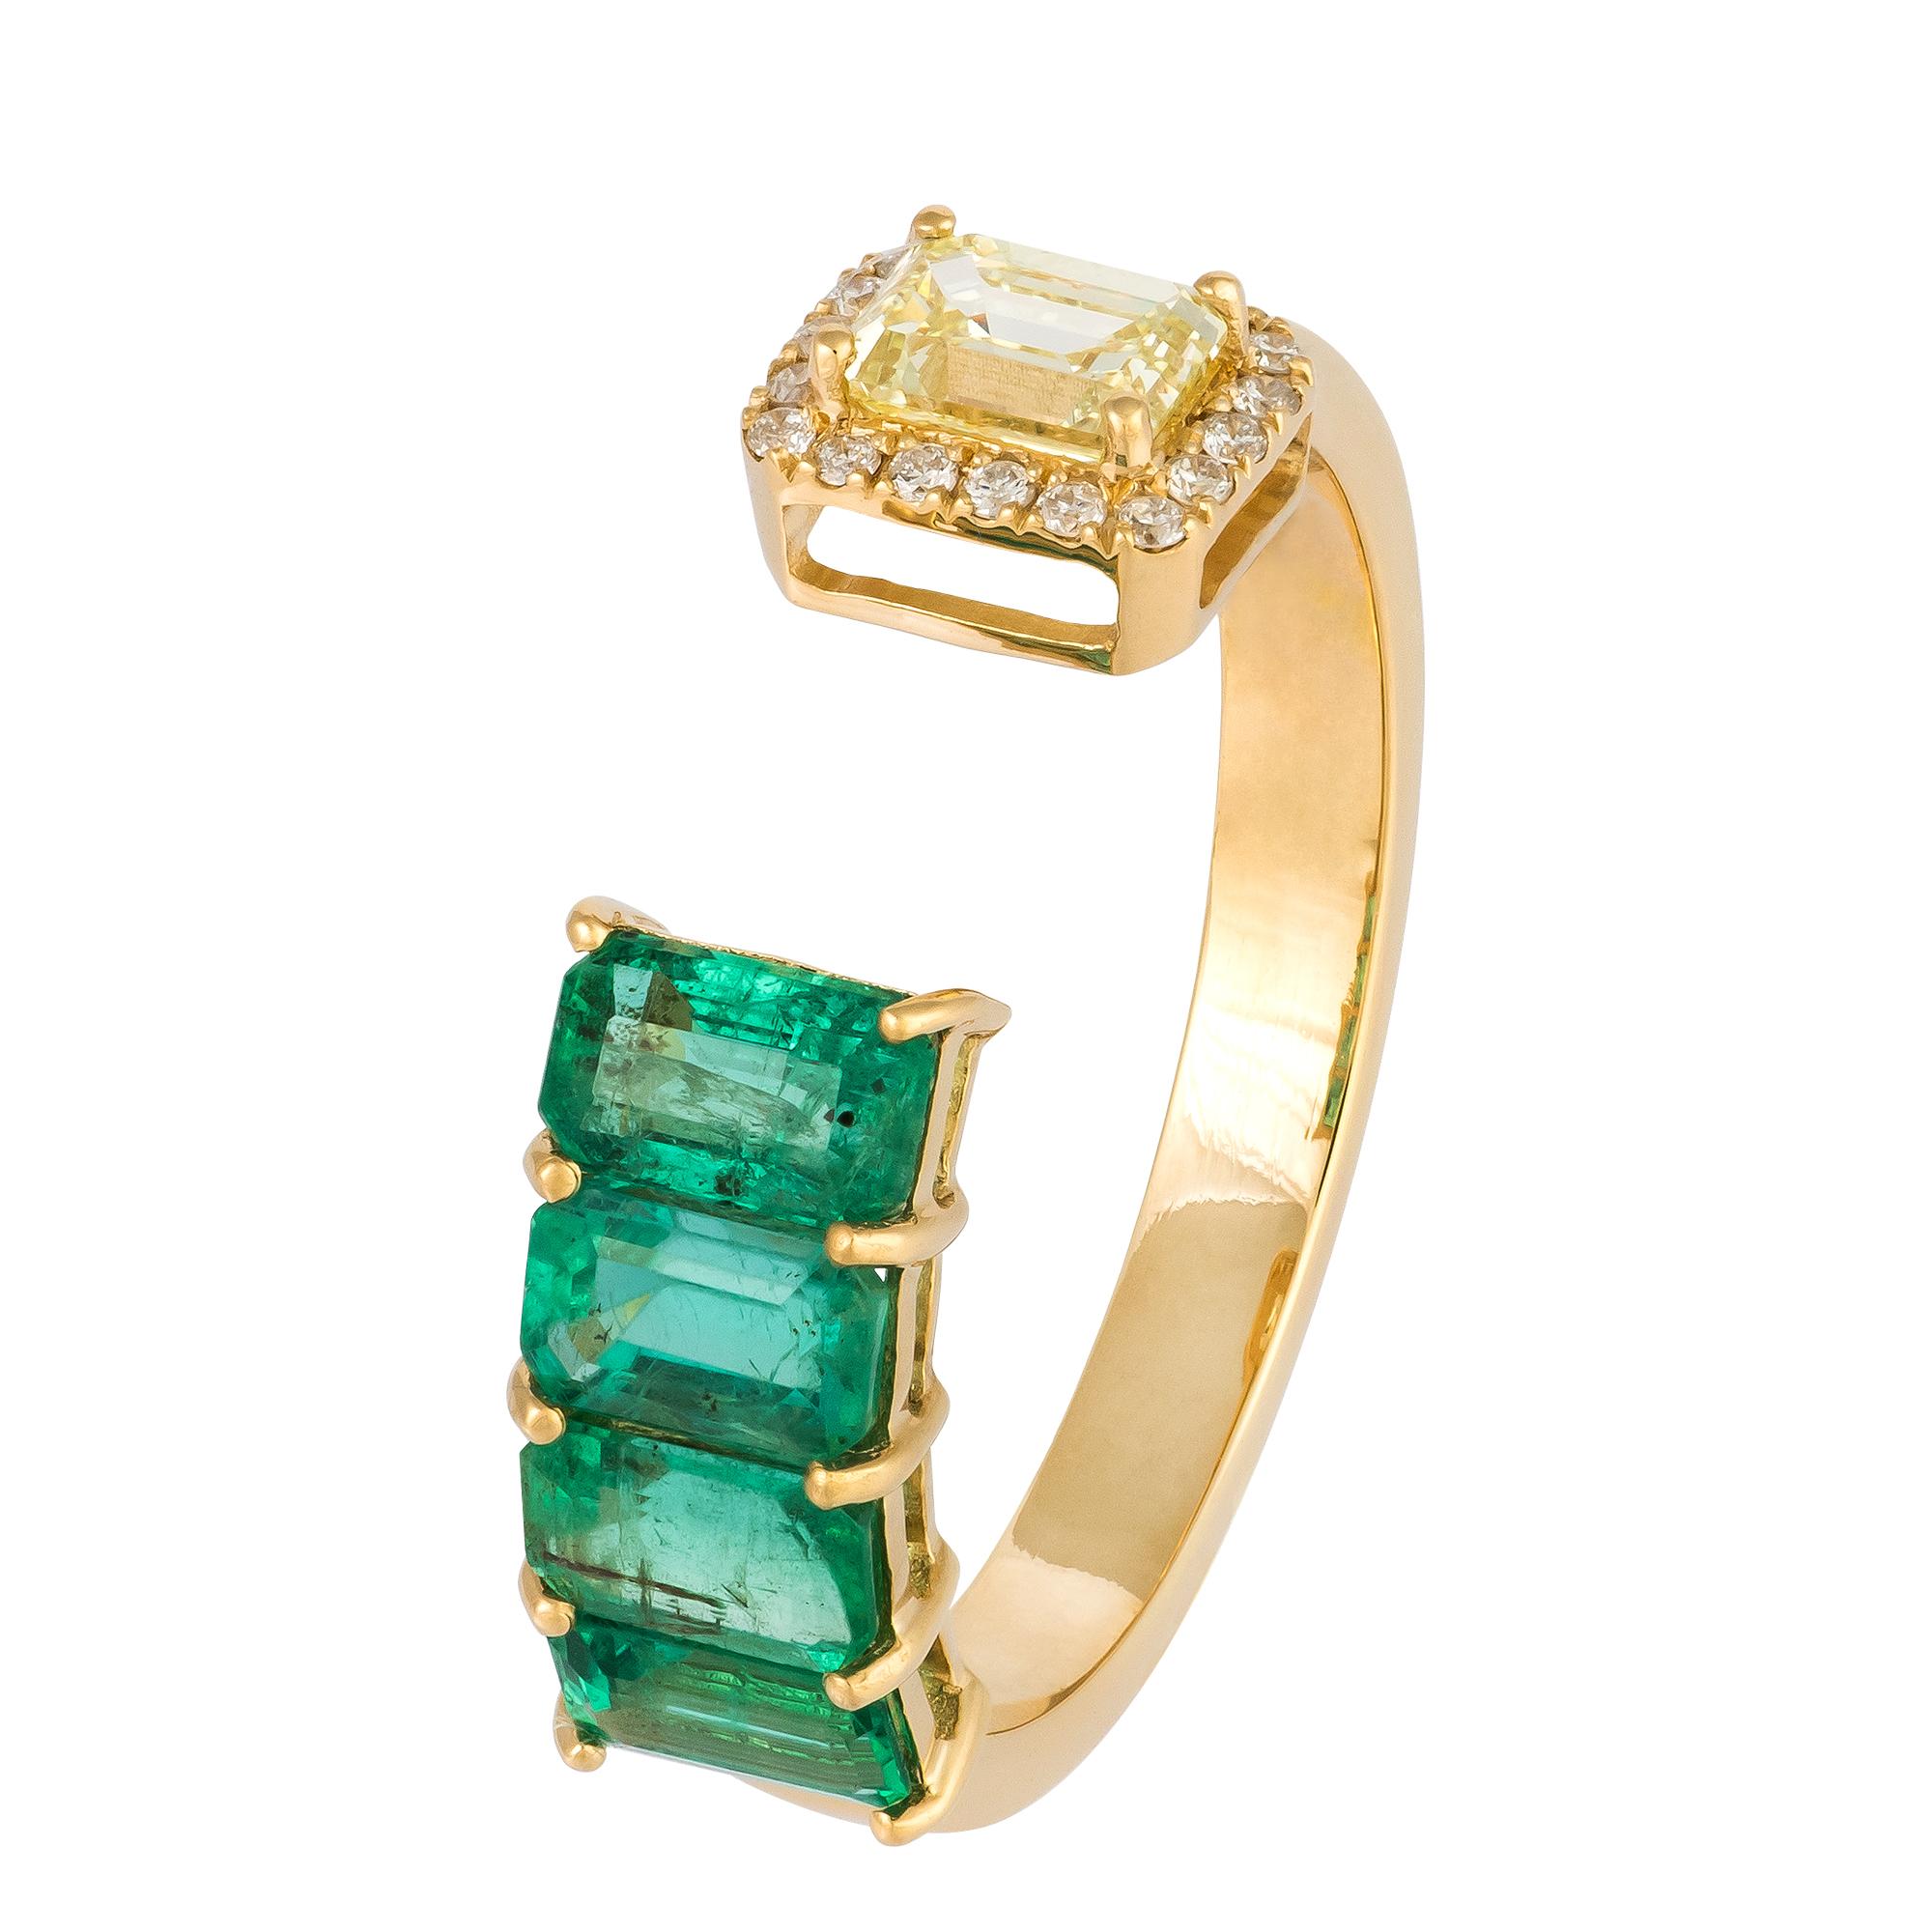 For Sale:  Impressive Emerald Yellow 18K Gold White Diamond Ring for Her 2